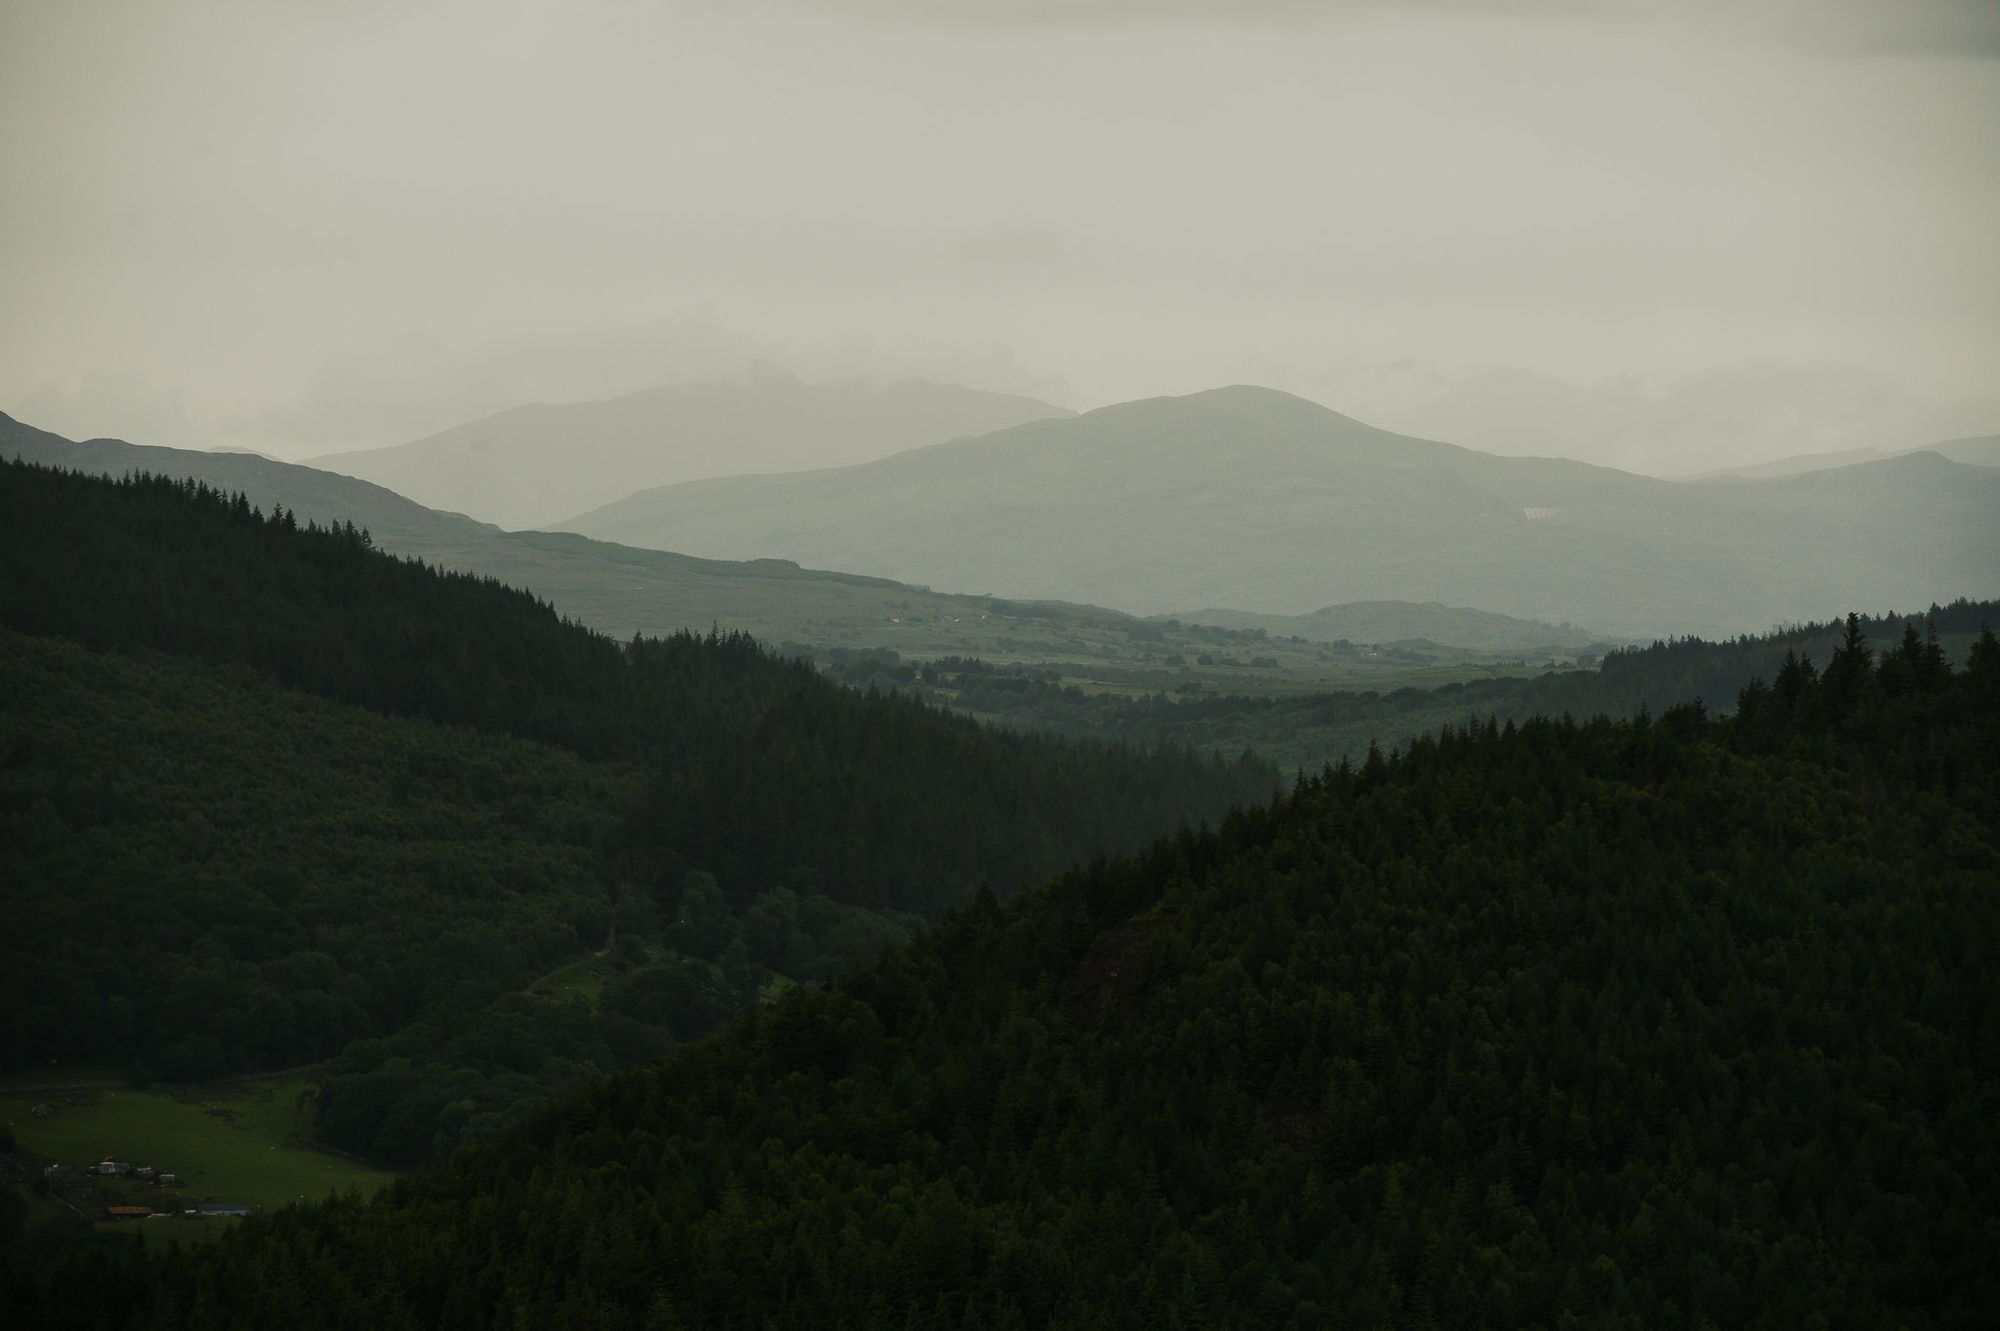 Moody atmospheric view across the hills and valleys of Gwynedd, North Wales.